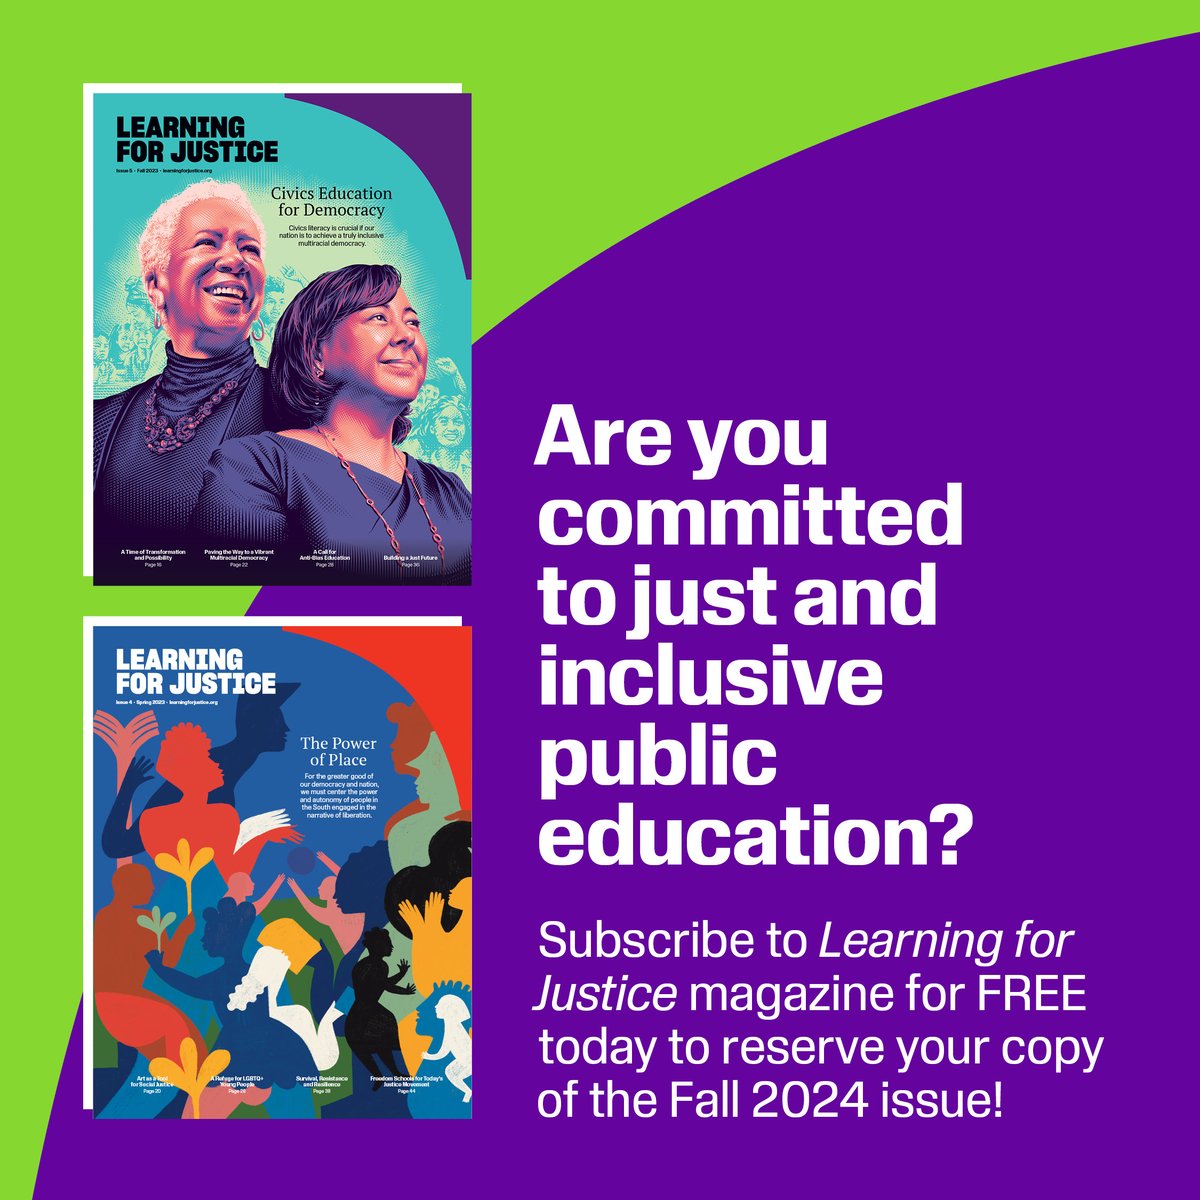 Subscribe to receive the free @LearnforJustice magazine, coming in fall 2024 📖: bit.ly/3bOHKsi If you believe in strengthening democracy & support a more inclusive society, this magazine can help you further understand critical issues in education & #socialjustice.